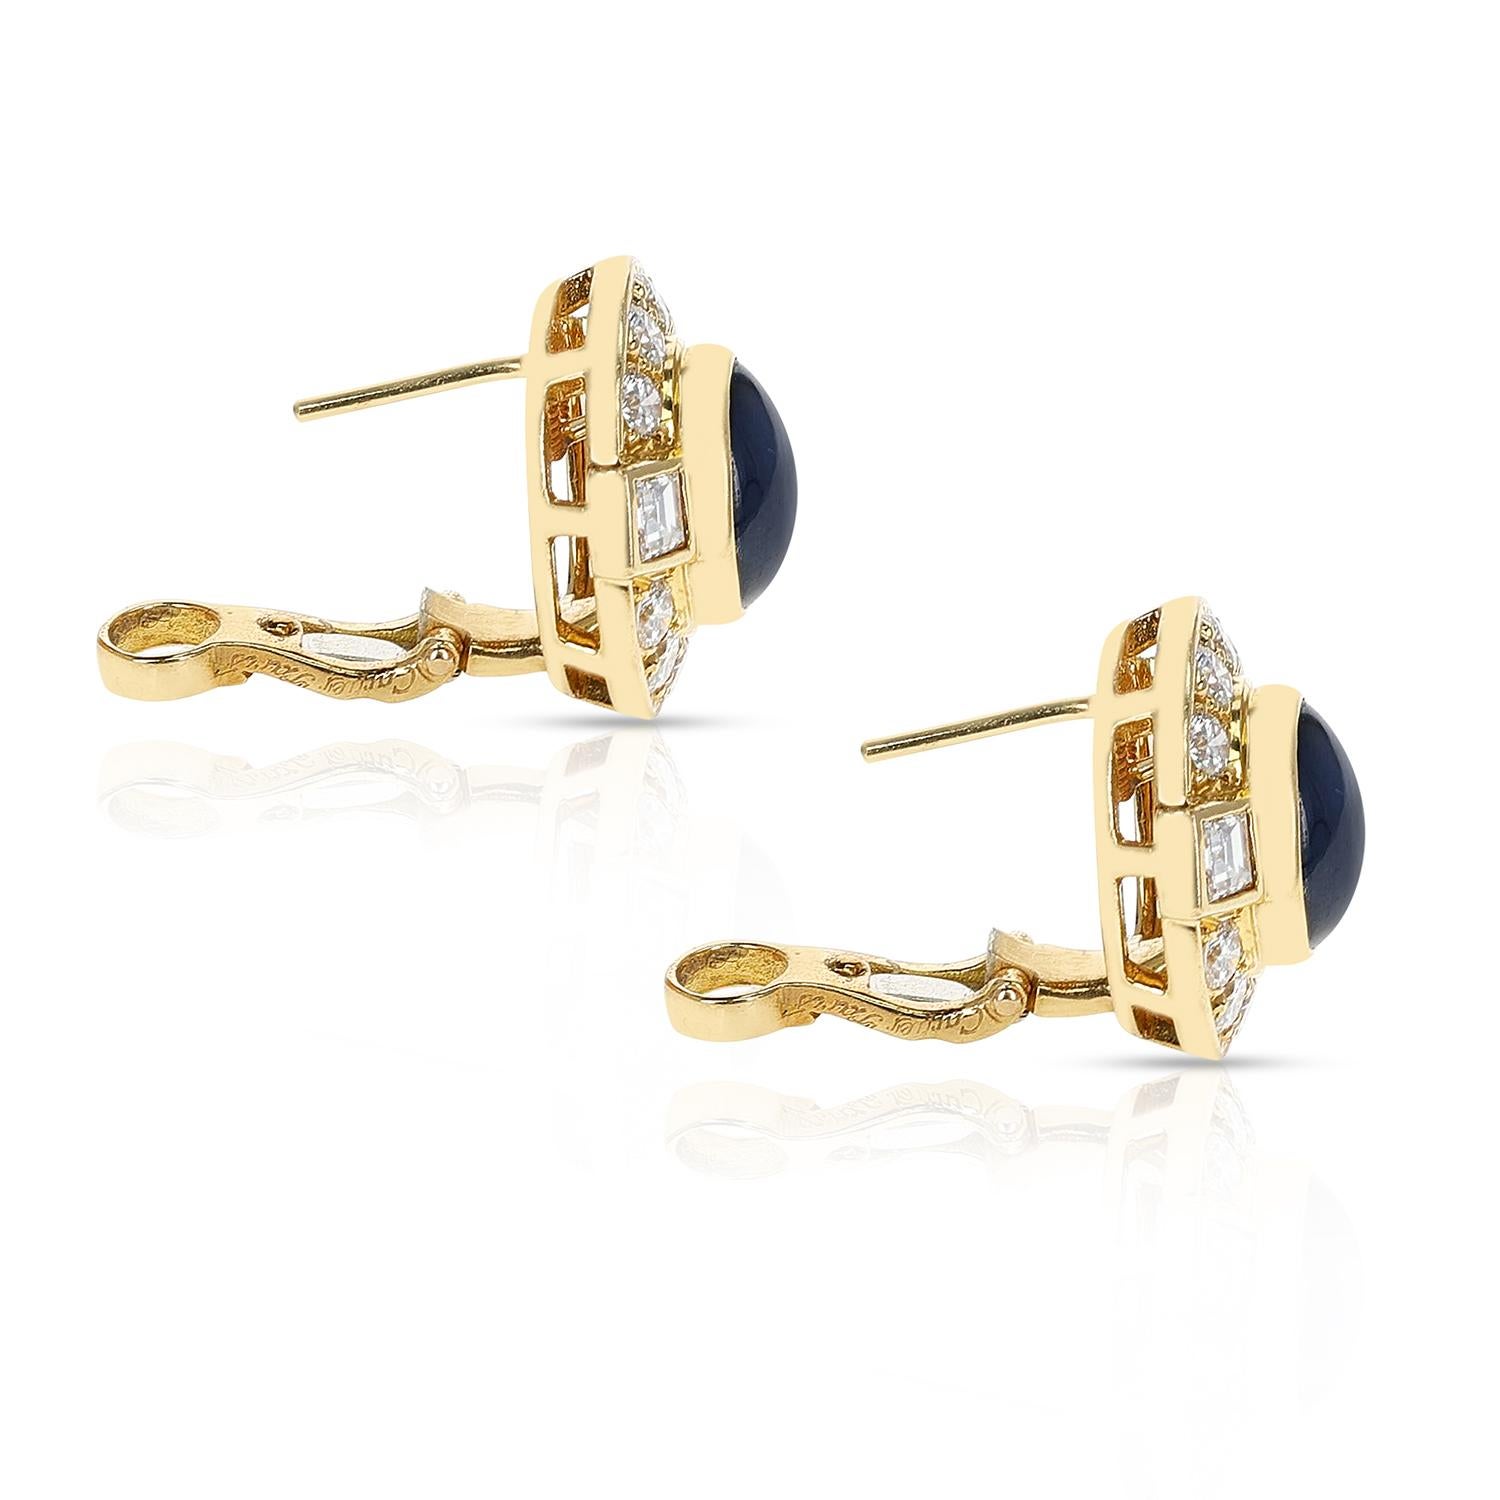 A pair of Cartier Paris Sapphire Cabochon and Diamond Earrings made in 18K Yellow Gold. The length is 0.75 inches. The total weight is 11.30 grams.